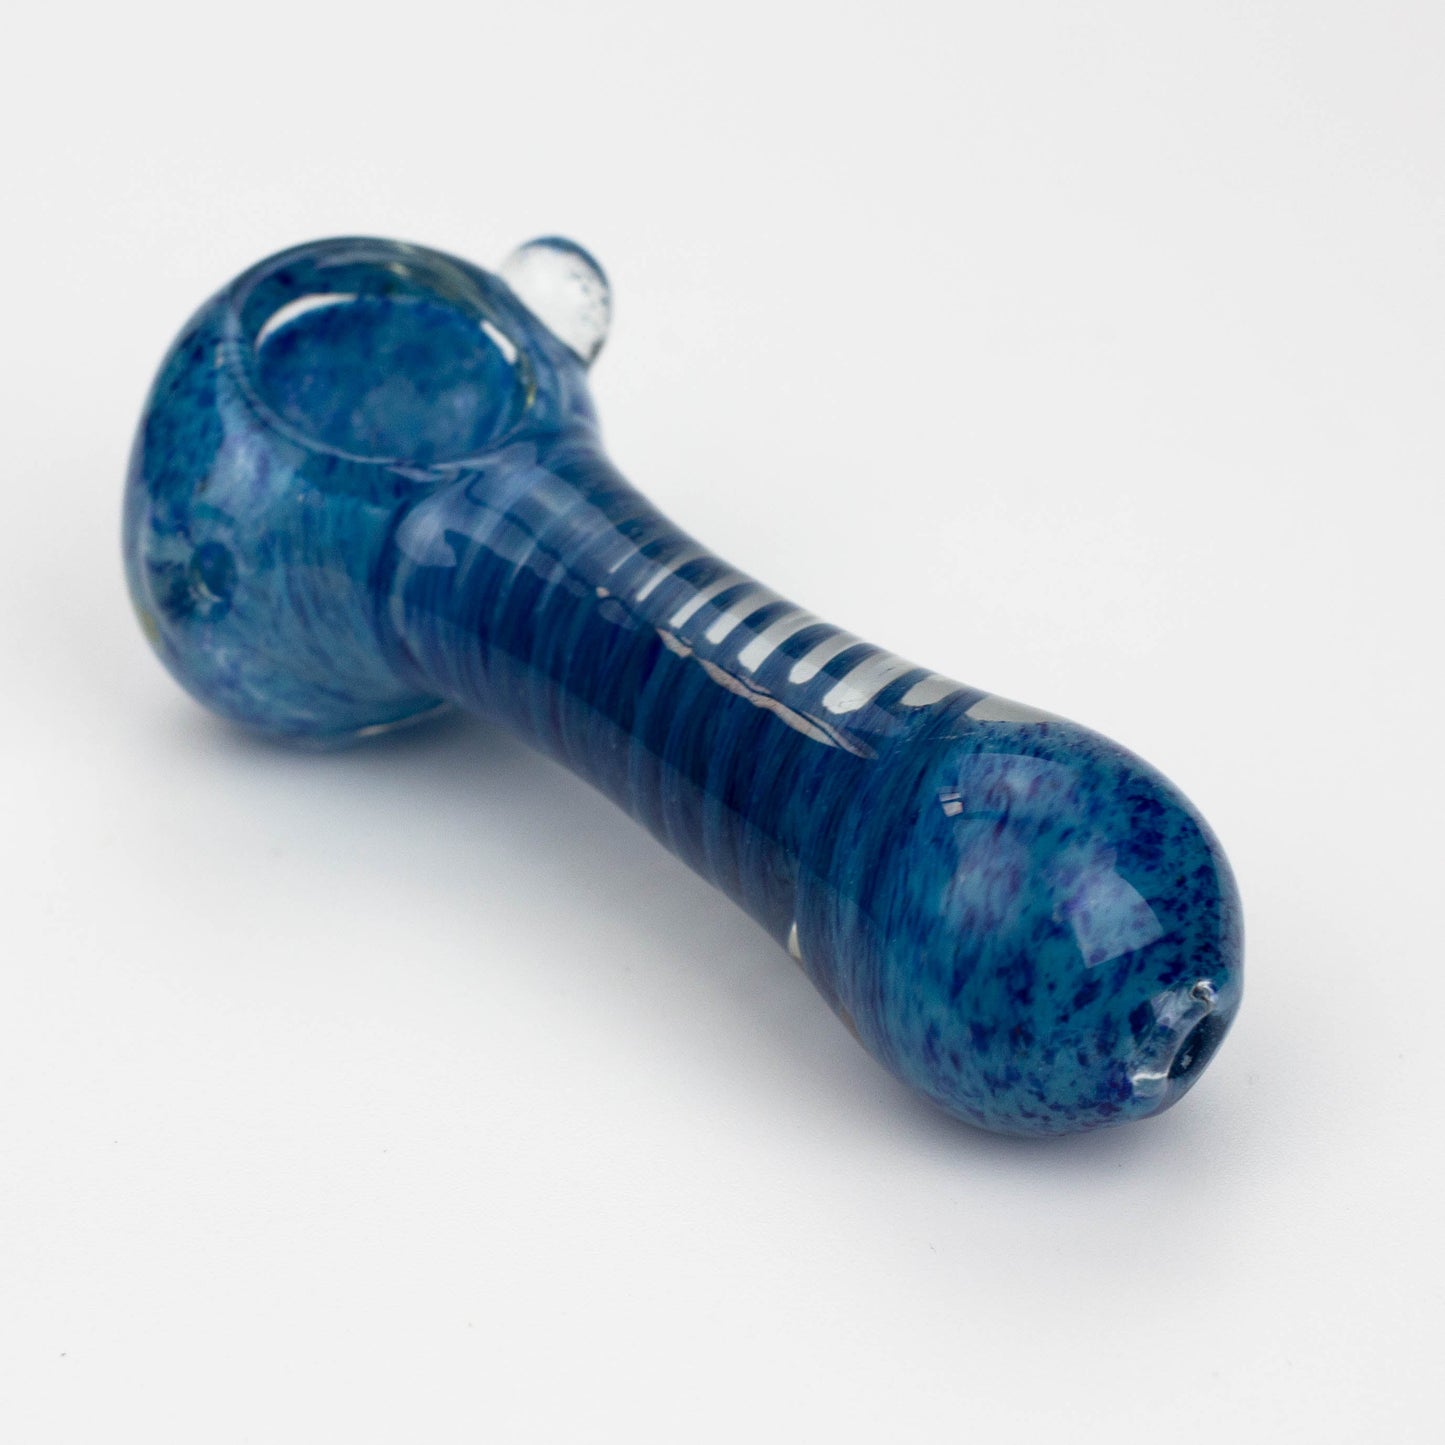 3" soft glass hand pipe [9187] Pack of 2_3